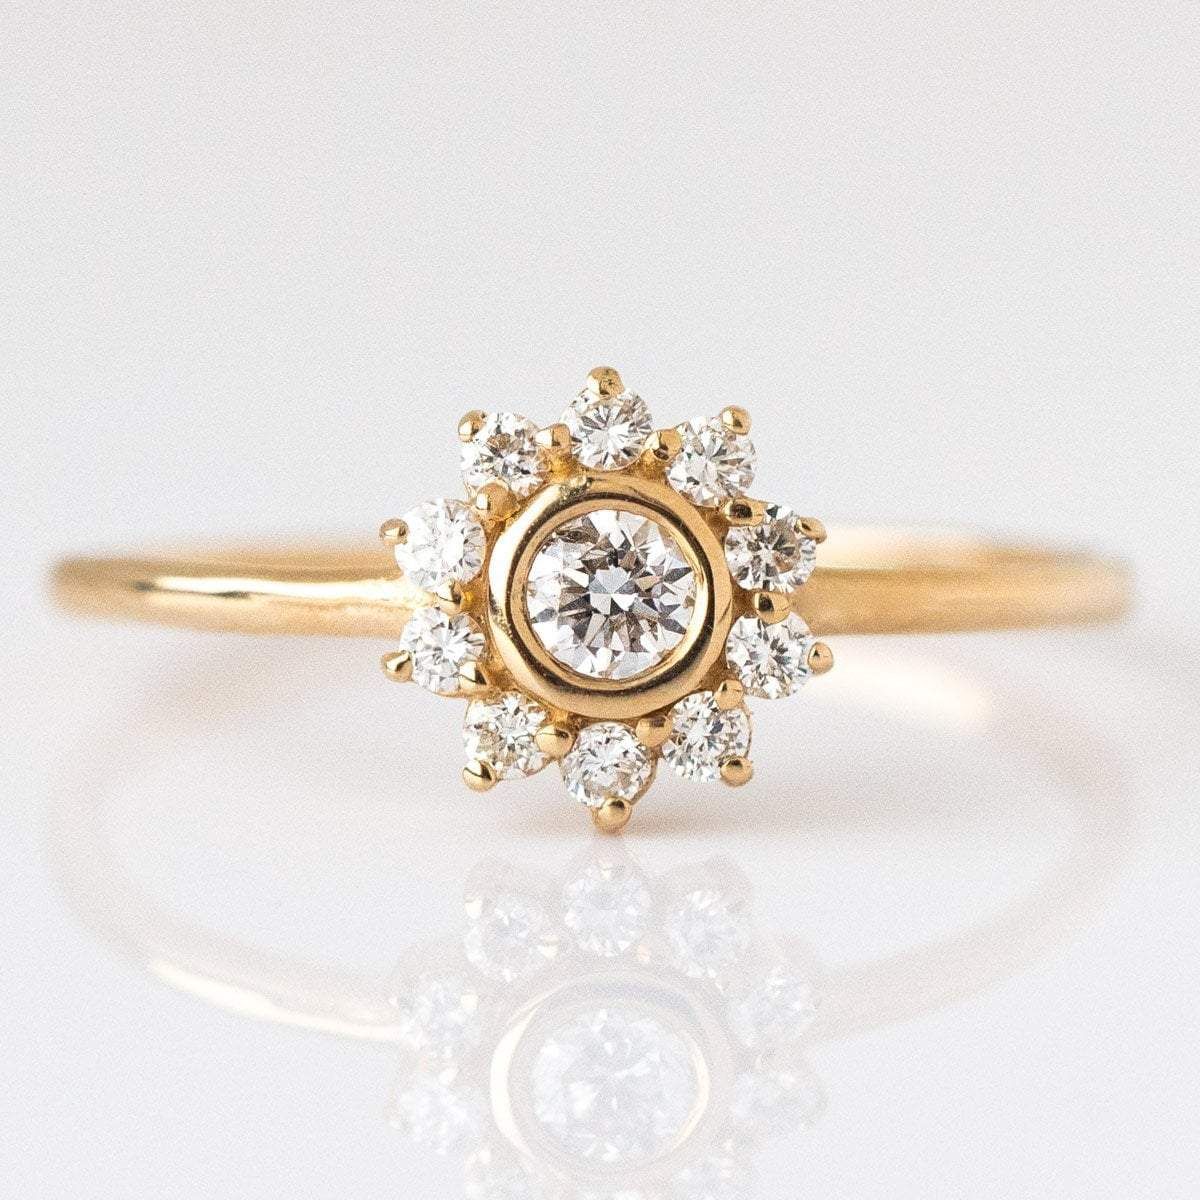 14K Gold Diamond Sunflower Ring | Local Eclectic